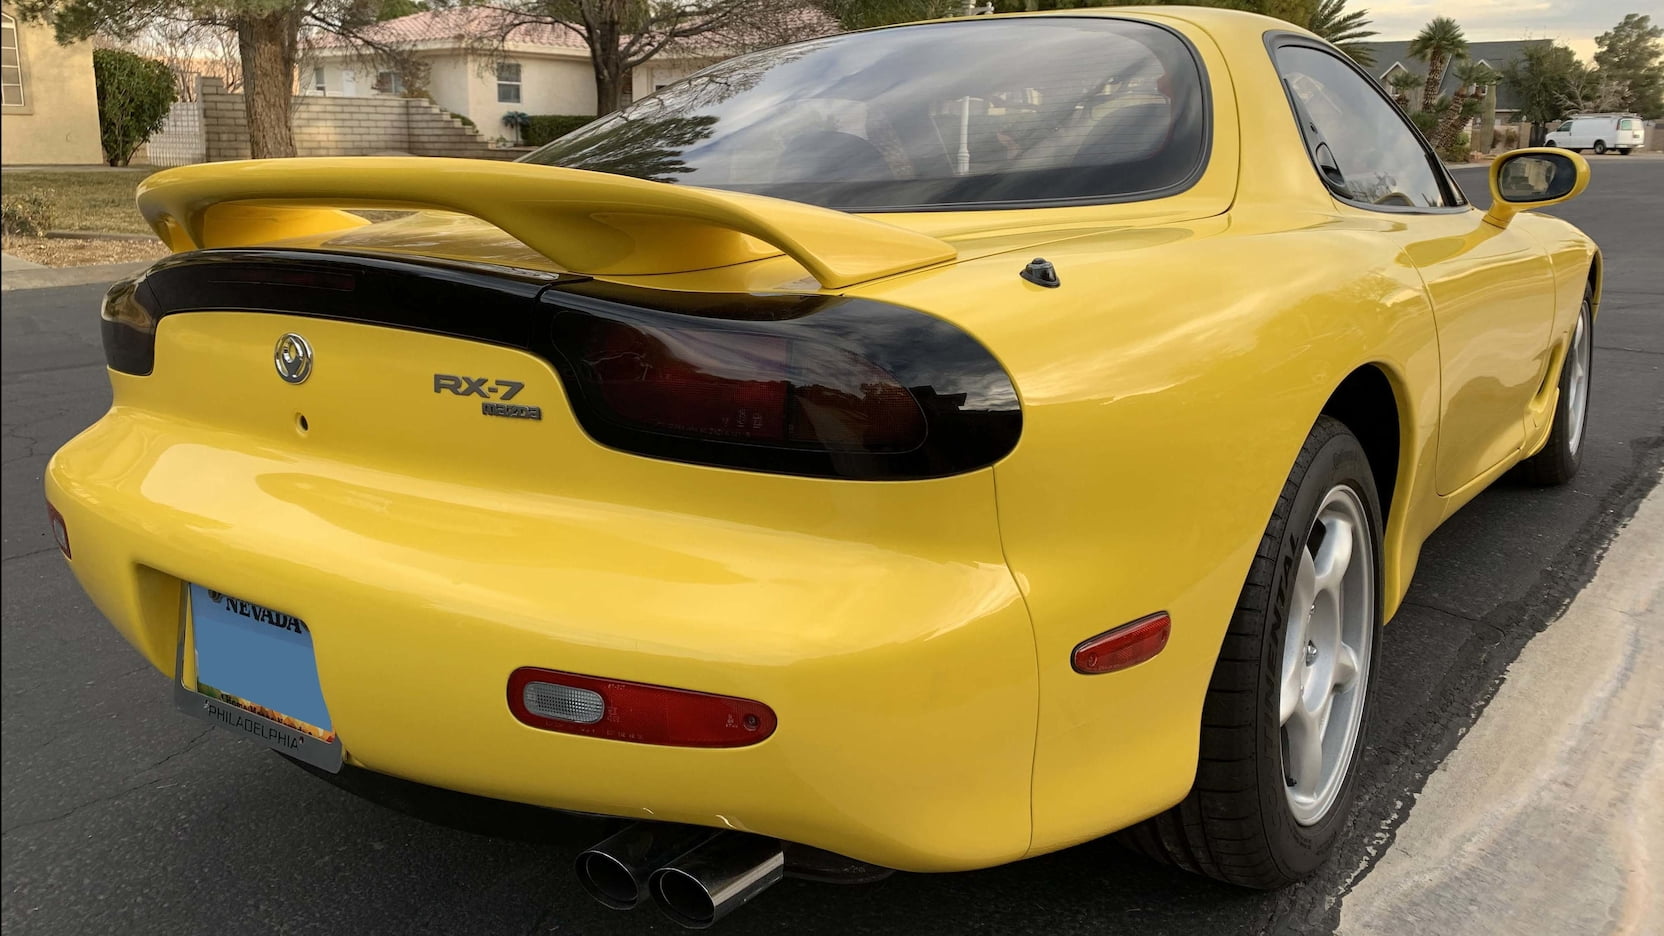 A Mazda Rx 7 Fd Has Sold For 60 000 At Auction Japanese Nostalgic Car